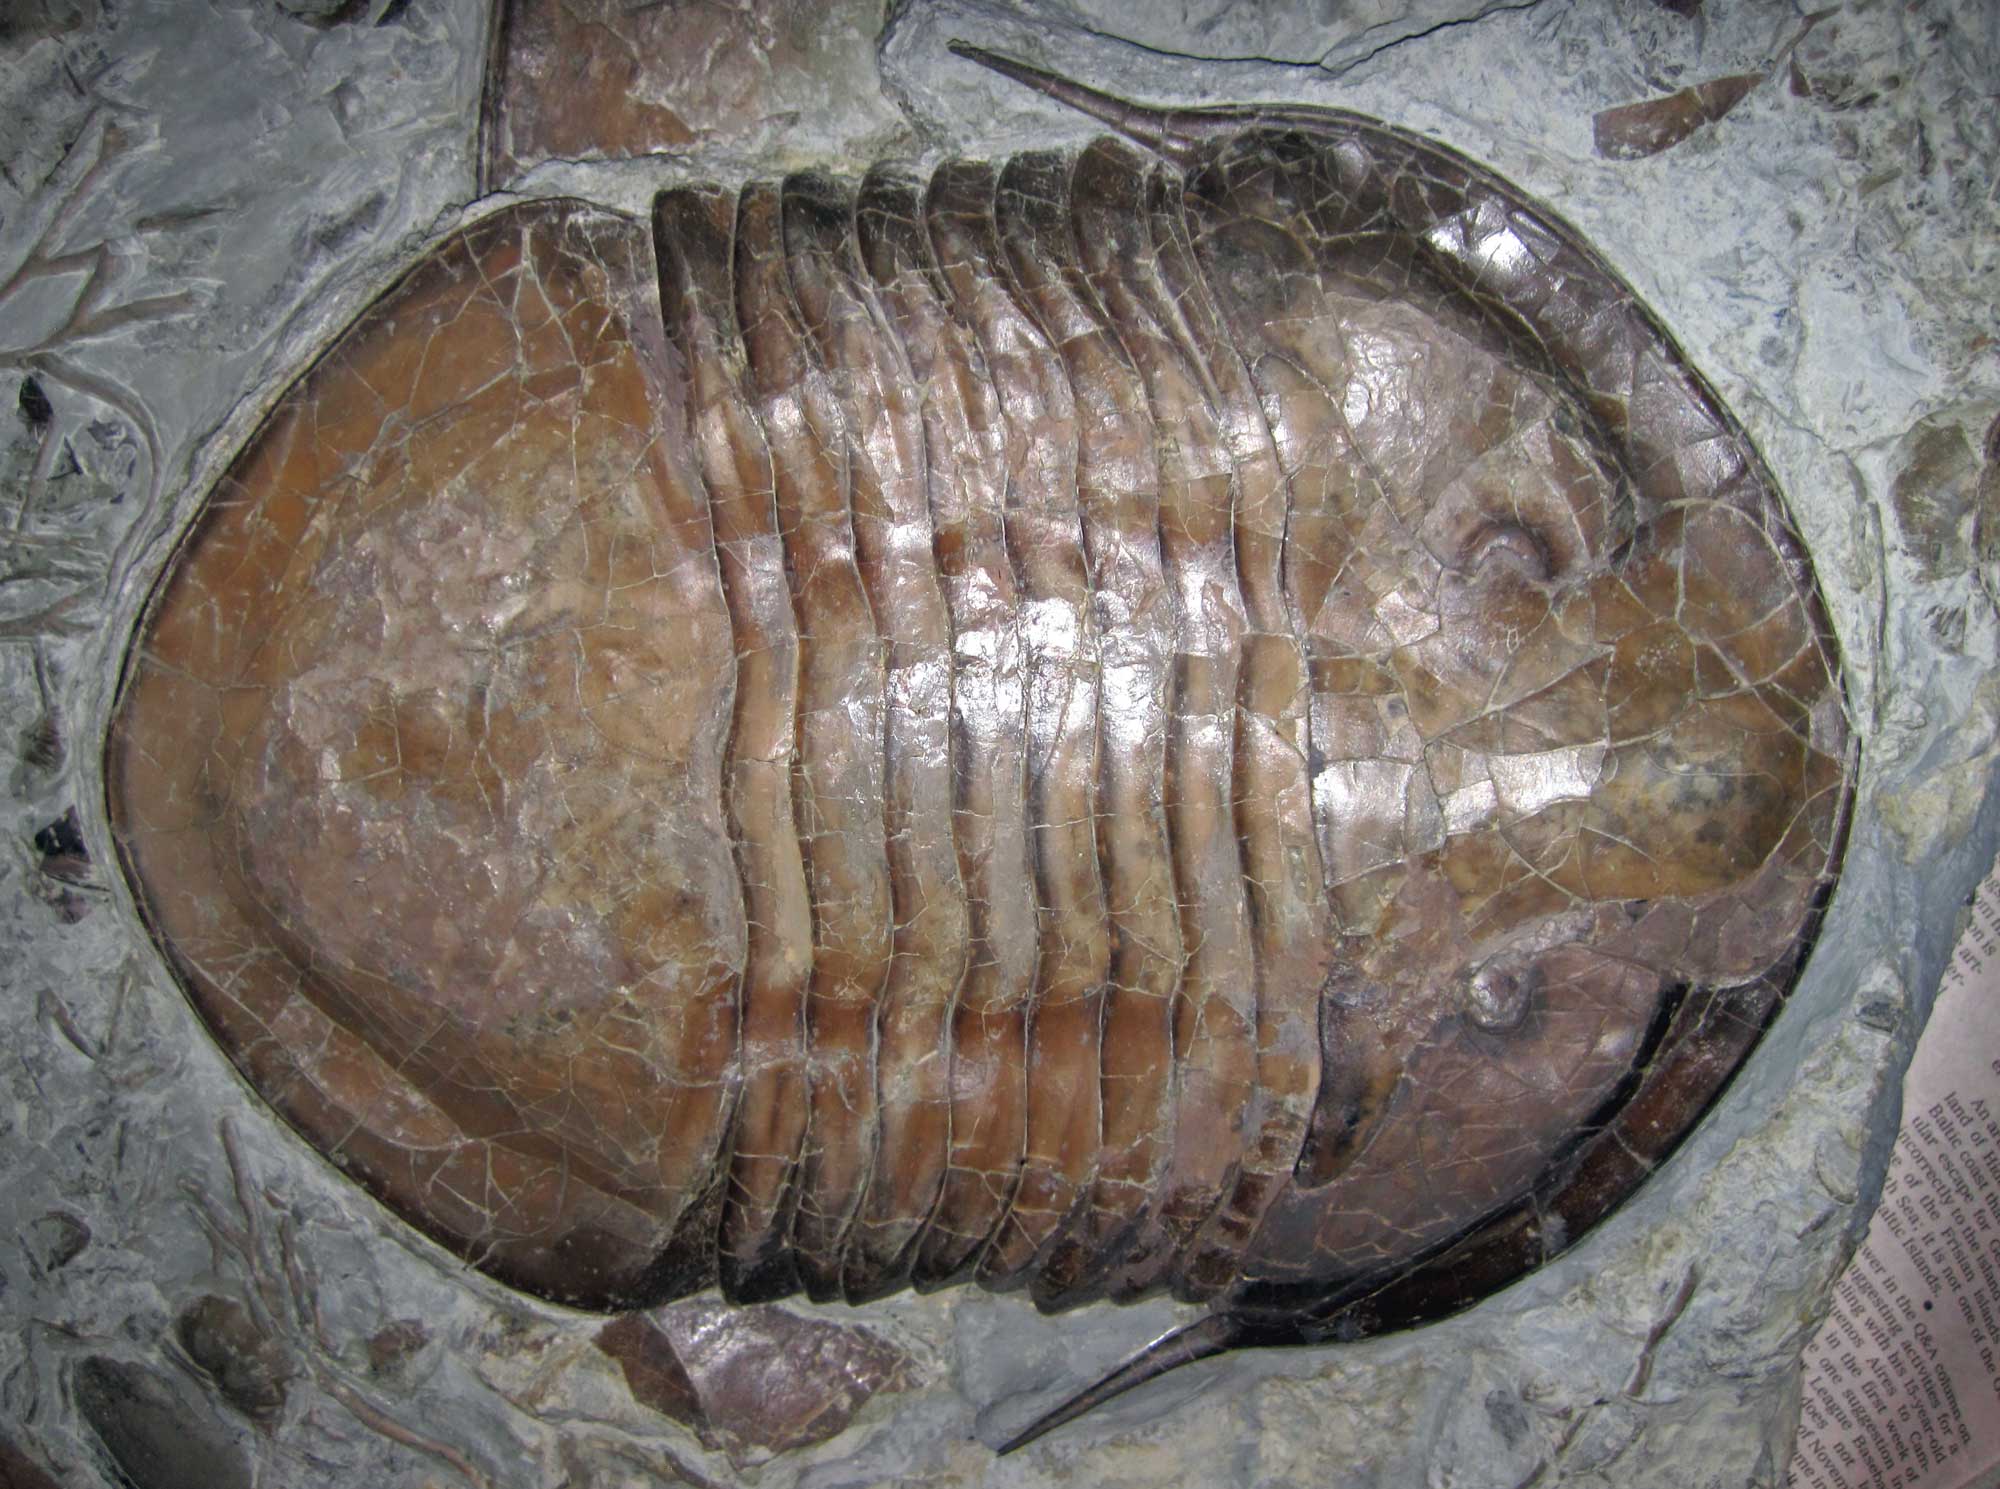 Photograph of a large trilobite from the Ordovician of Ohio. The photo shows a brown trilobite exposed on the surface of a gray rock. The head of the trilobite is pointed to the right. The overall shape of the trilobite is roughly oval. The cephalon has two long spines extending backwards. The eyes are relatively small. 